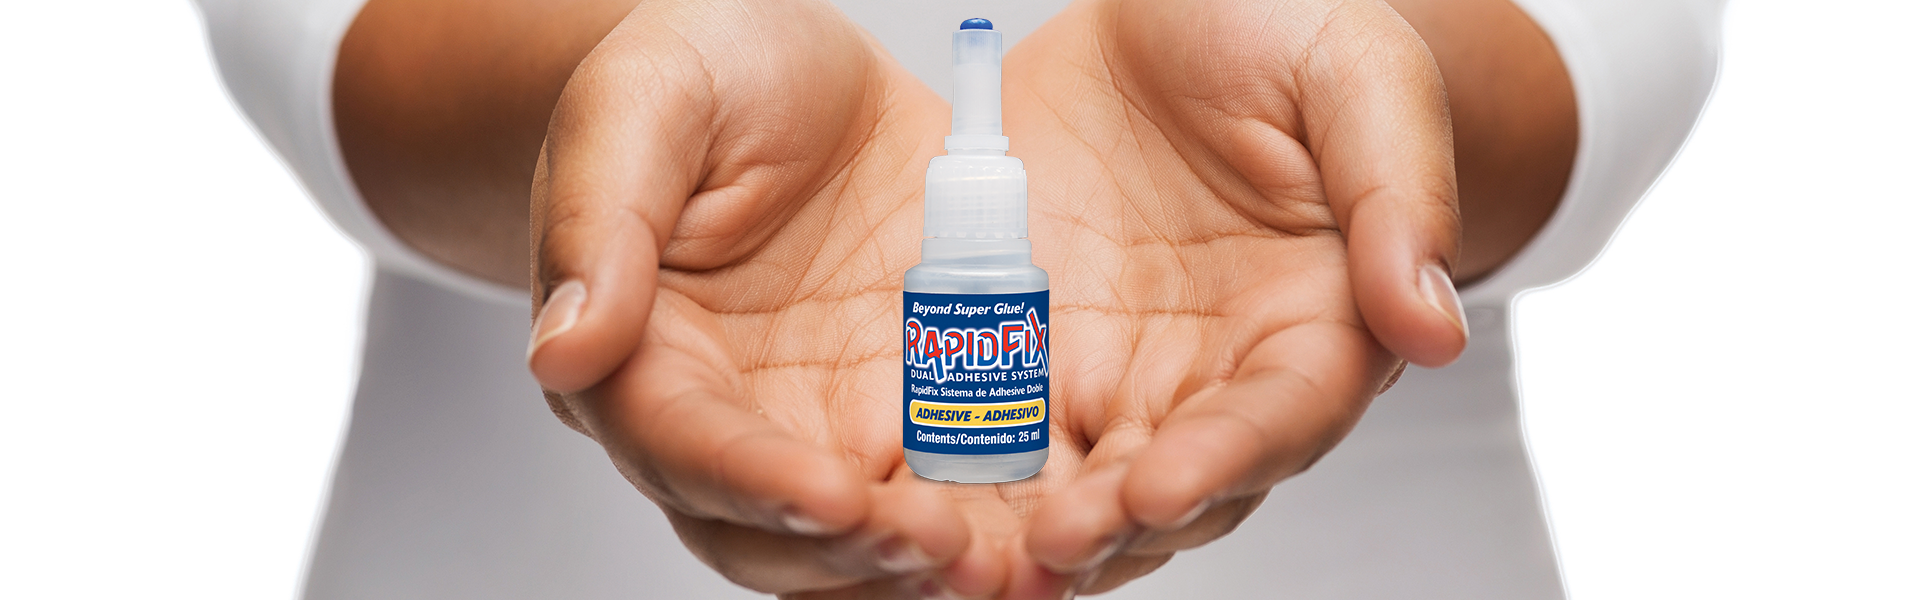 How To Remove Super Glue And RapidFix From Skin